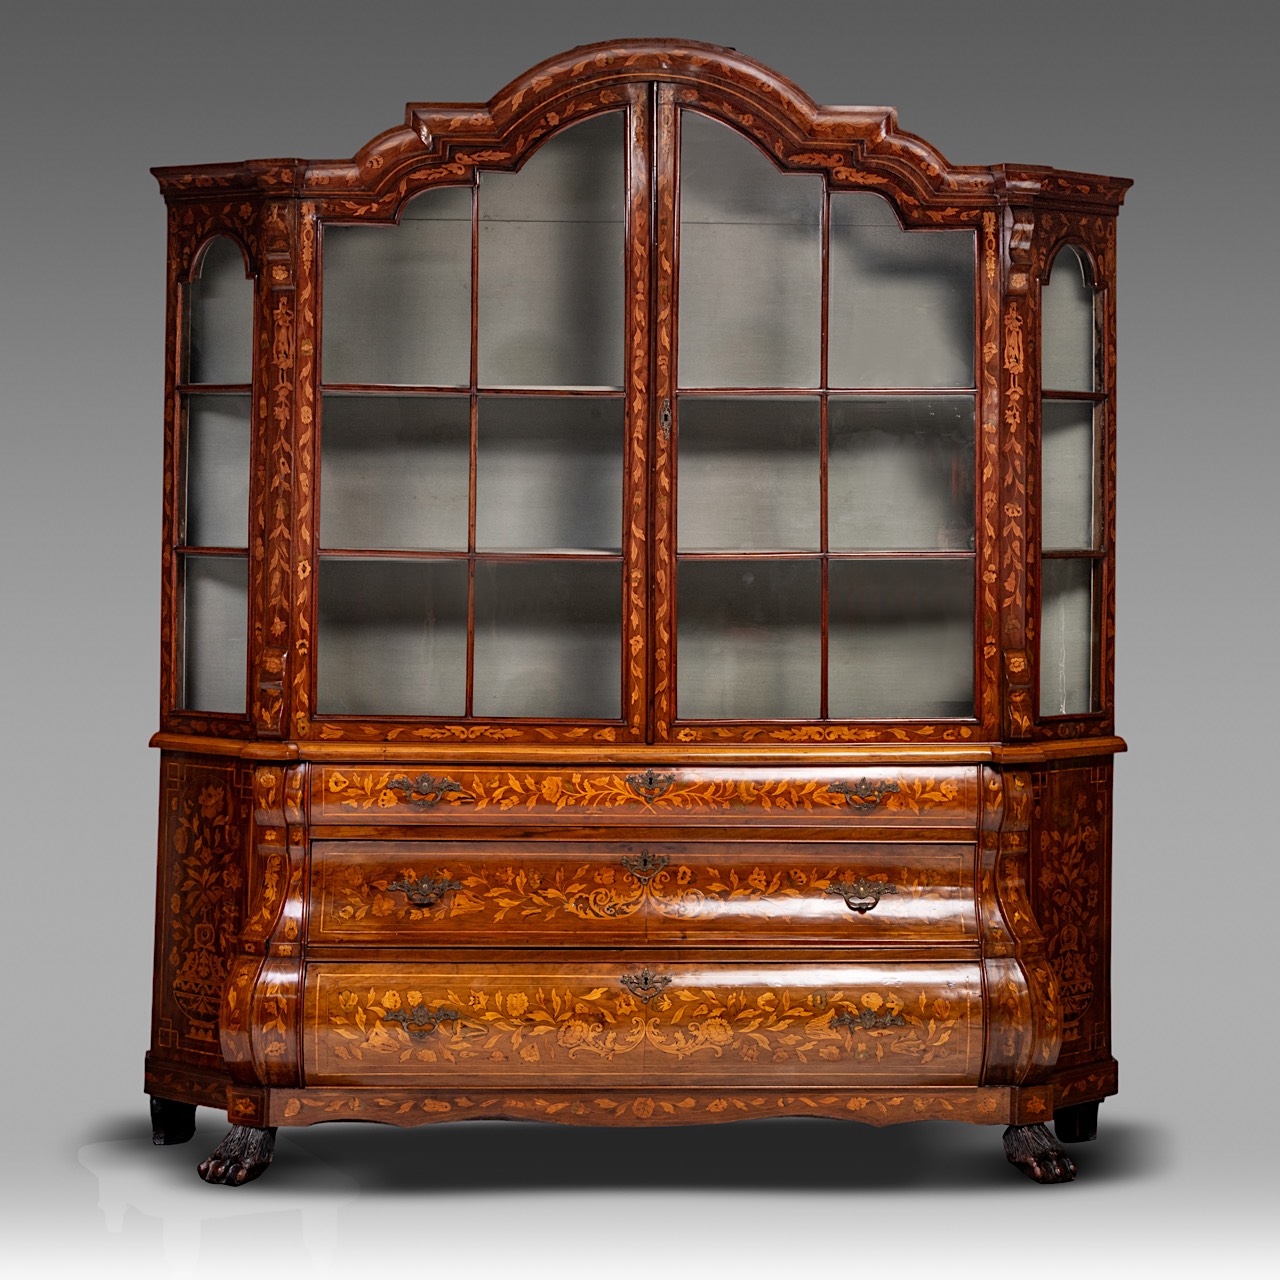 A Dutch floral marquetry display cabinet, 18thC, H 209 cm - W 184 cm - D 43 cm - Image 2 of 5